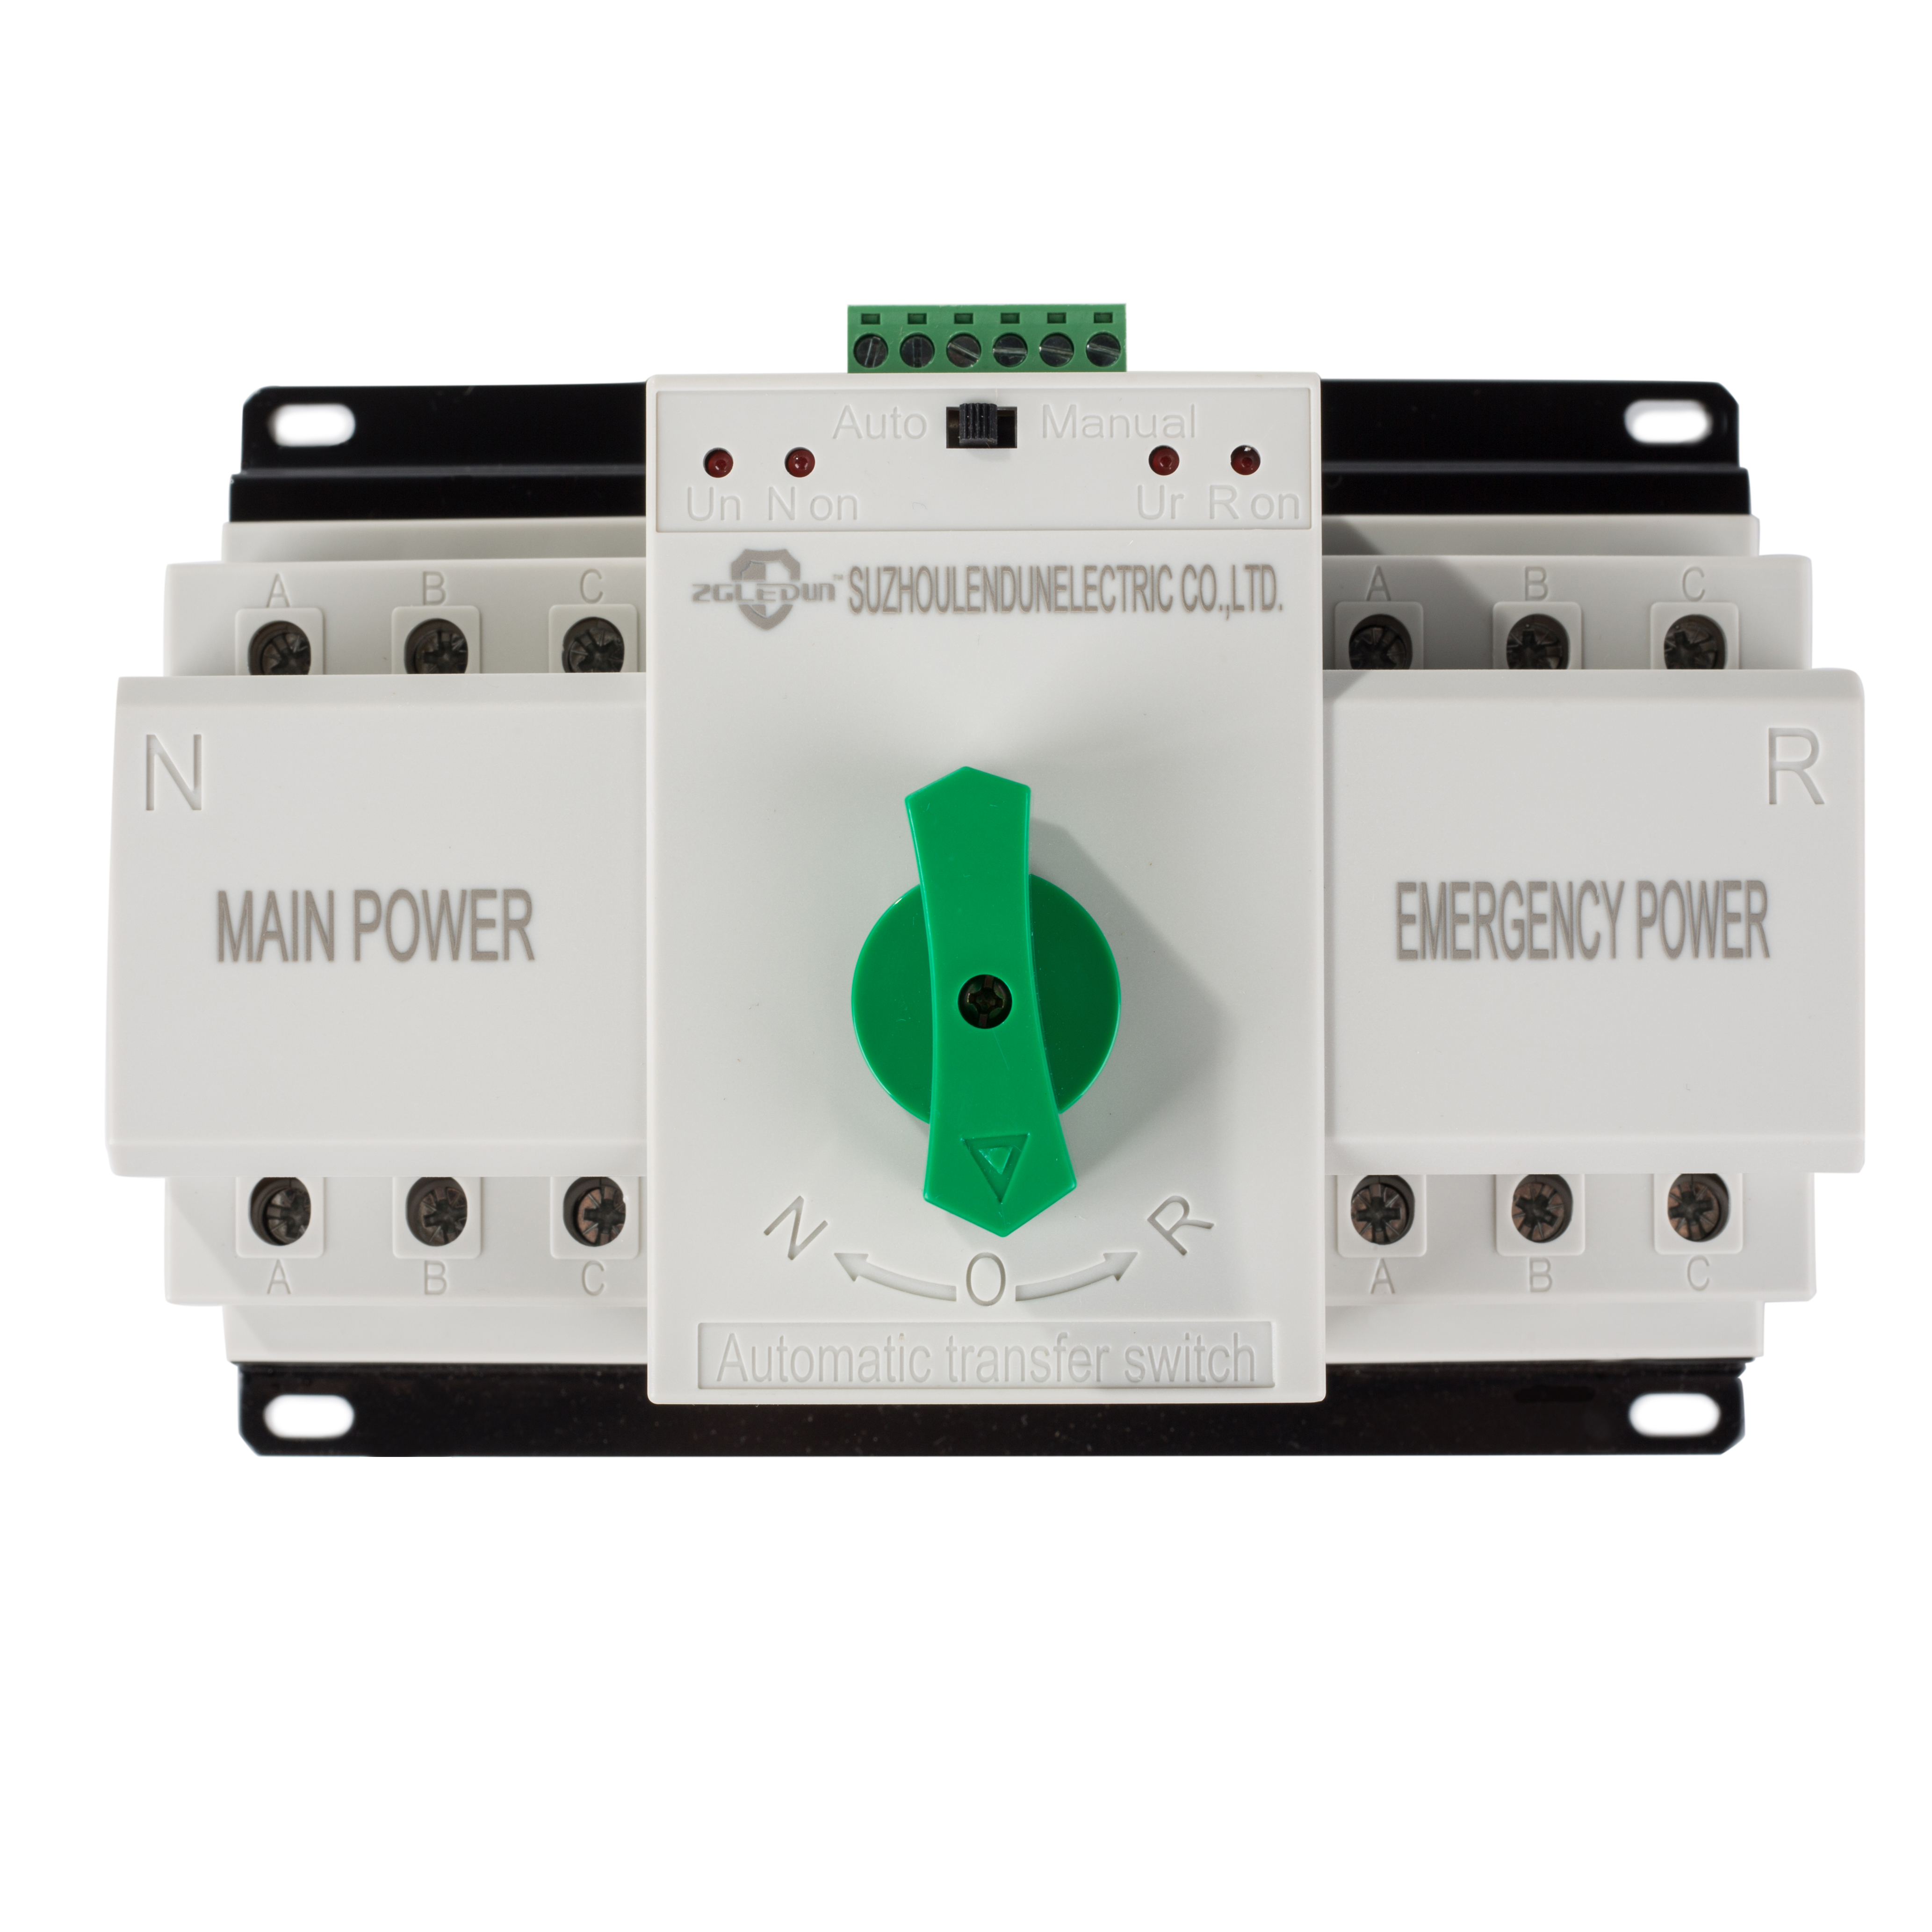 CB Level Mini Dual Power Automatic Transfer Switch, ATSE 2P,3P,4P 63A, Intelligent Change-over Switch Featured Image